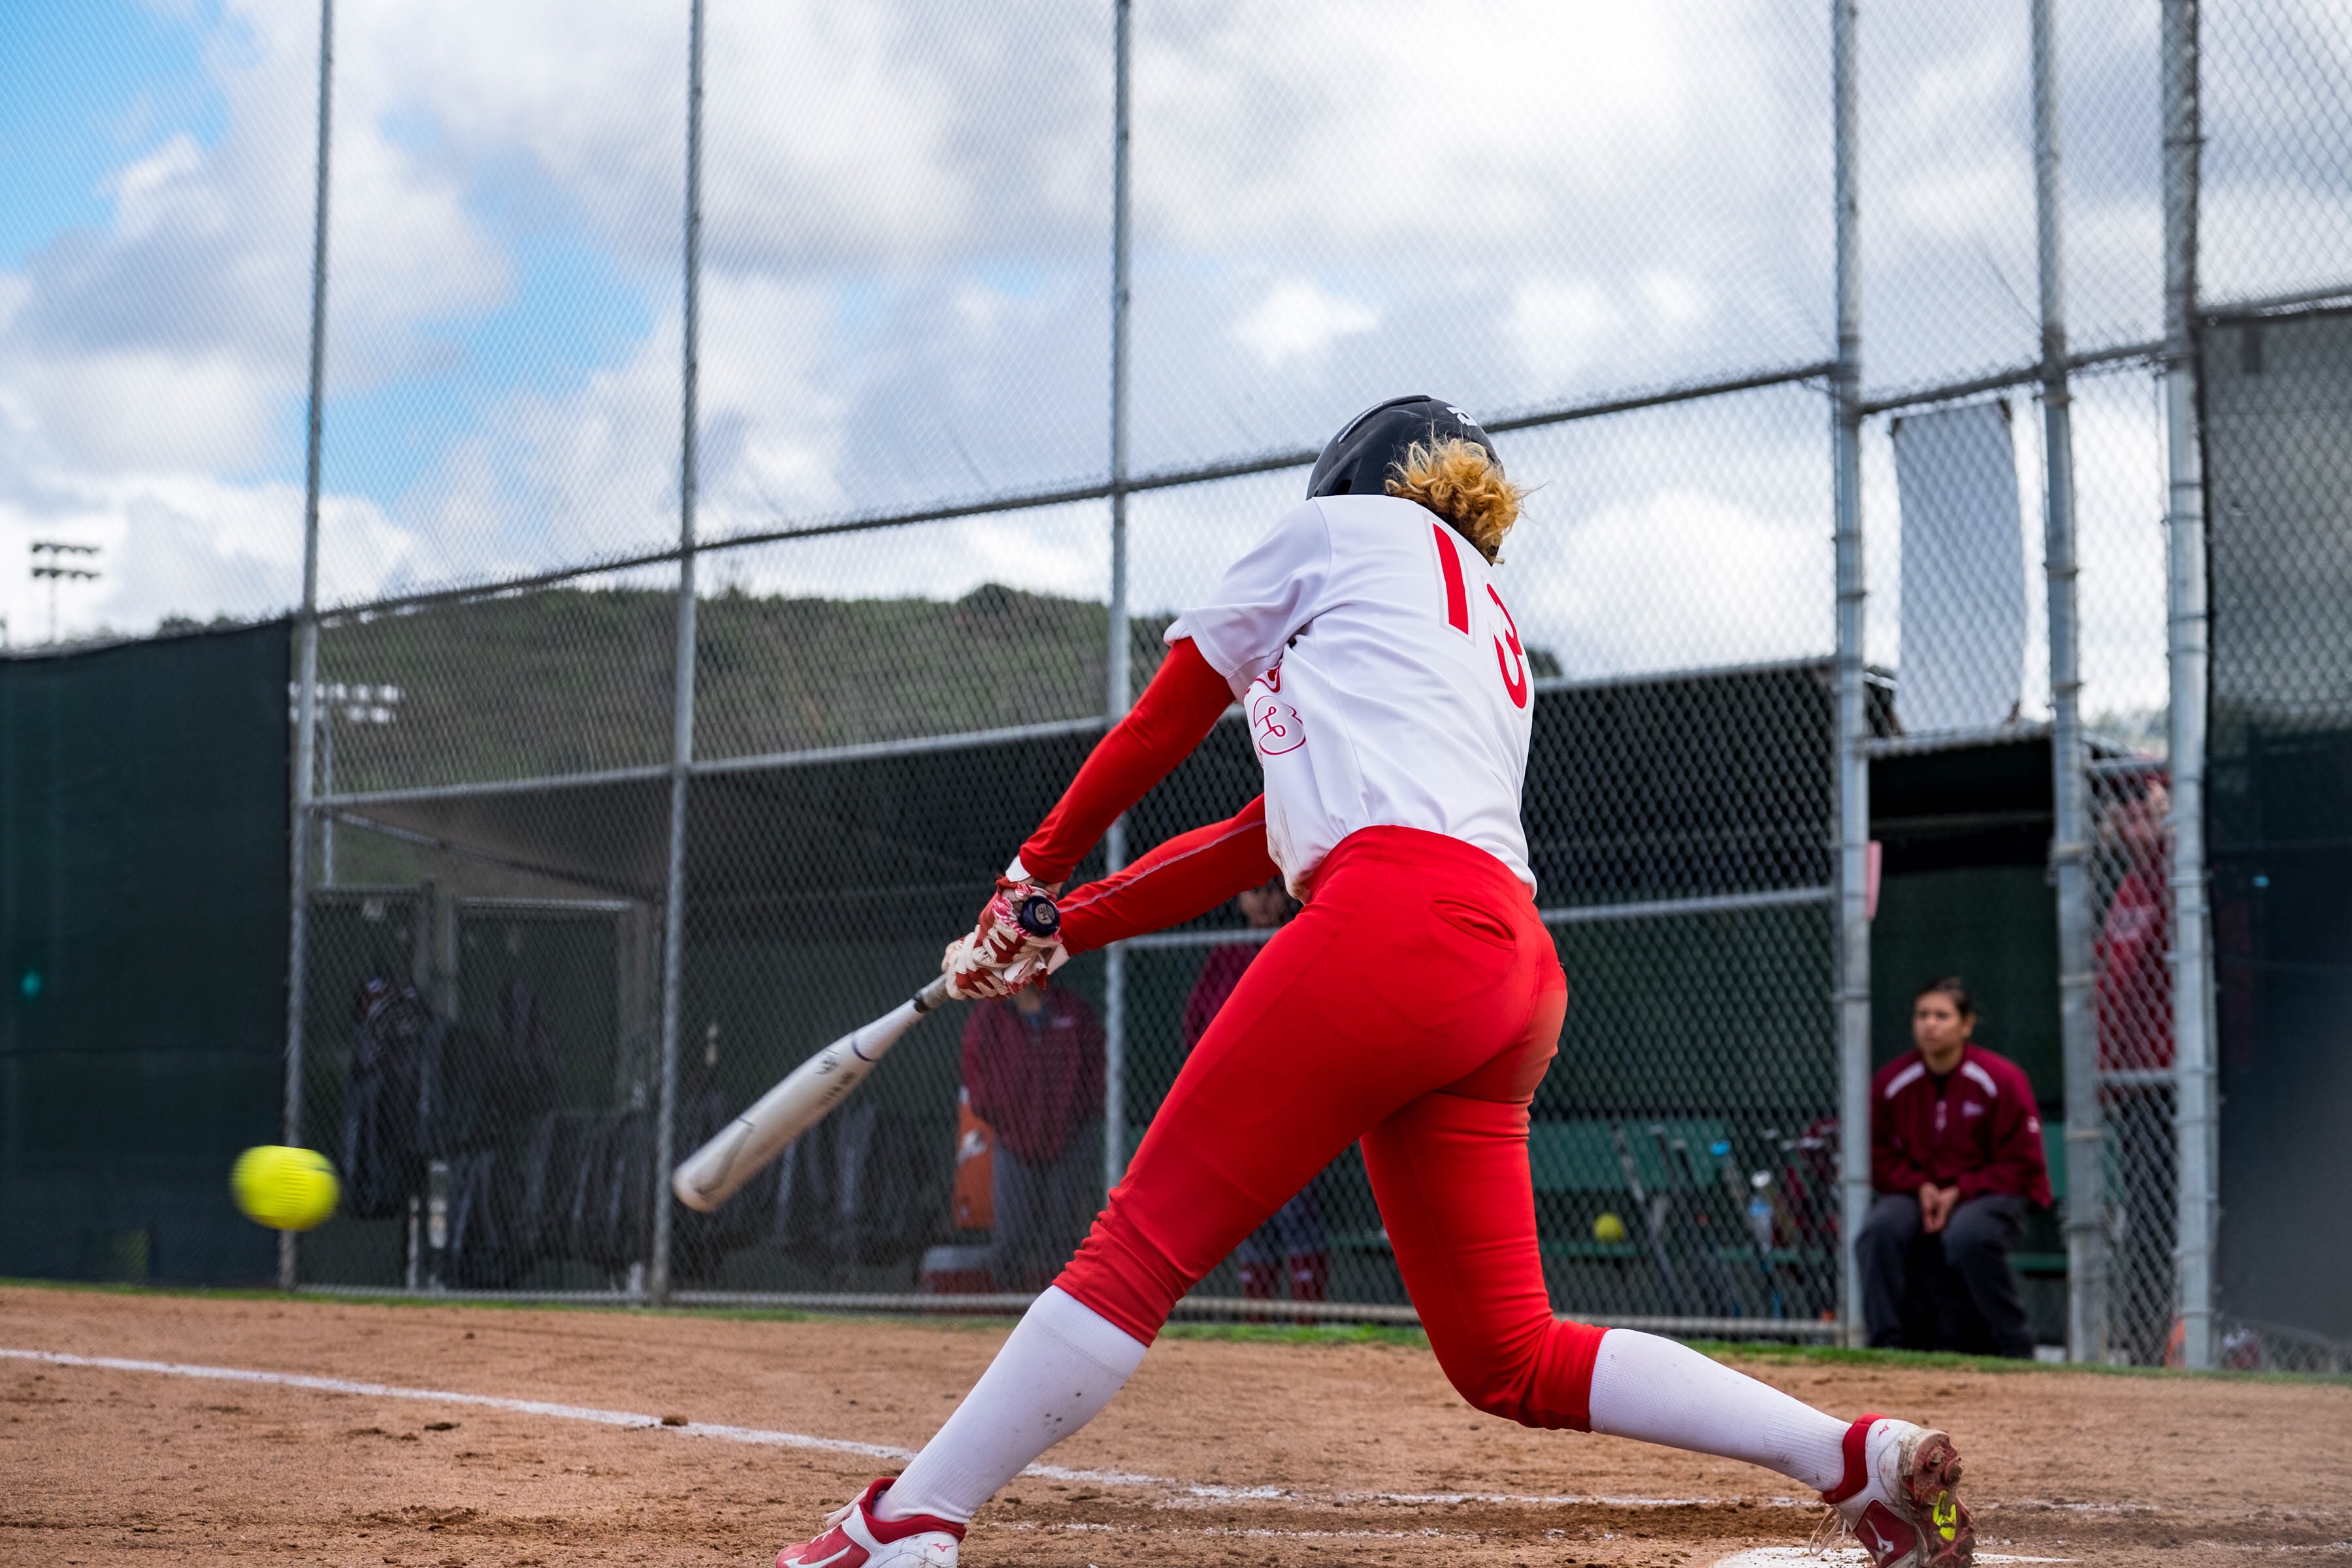 Sarah Fisher hits a line drive on March 8, 2019. (Sukhi Heumann/The Telescope)